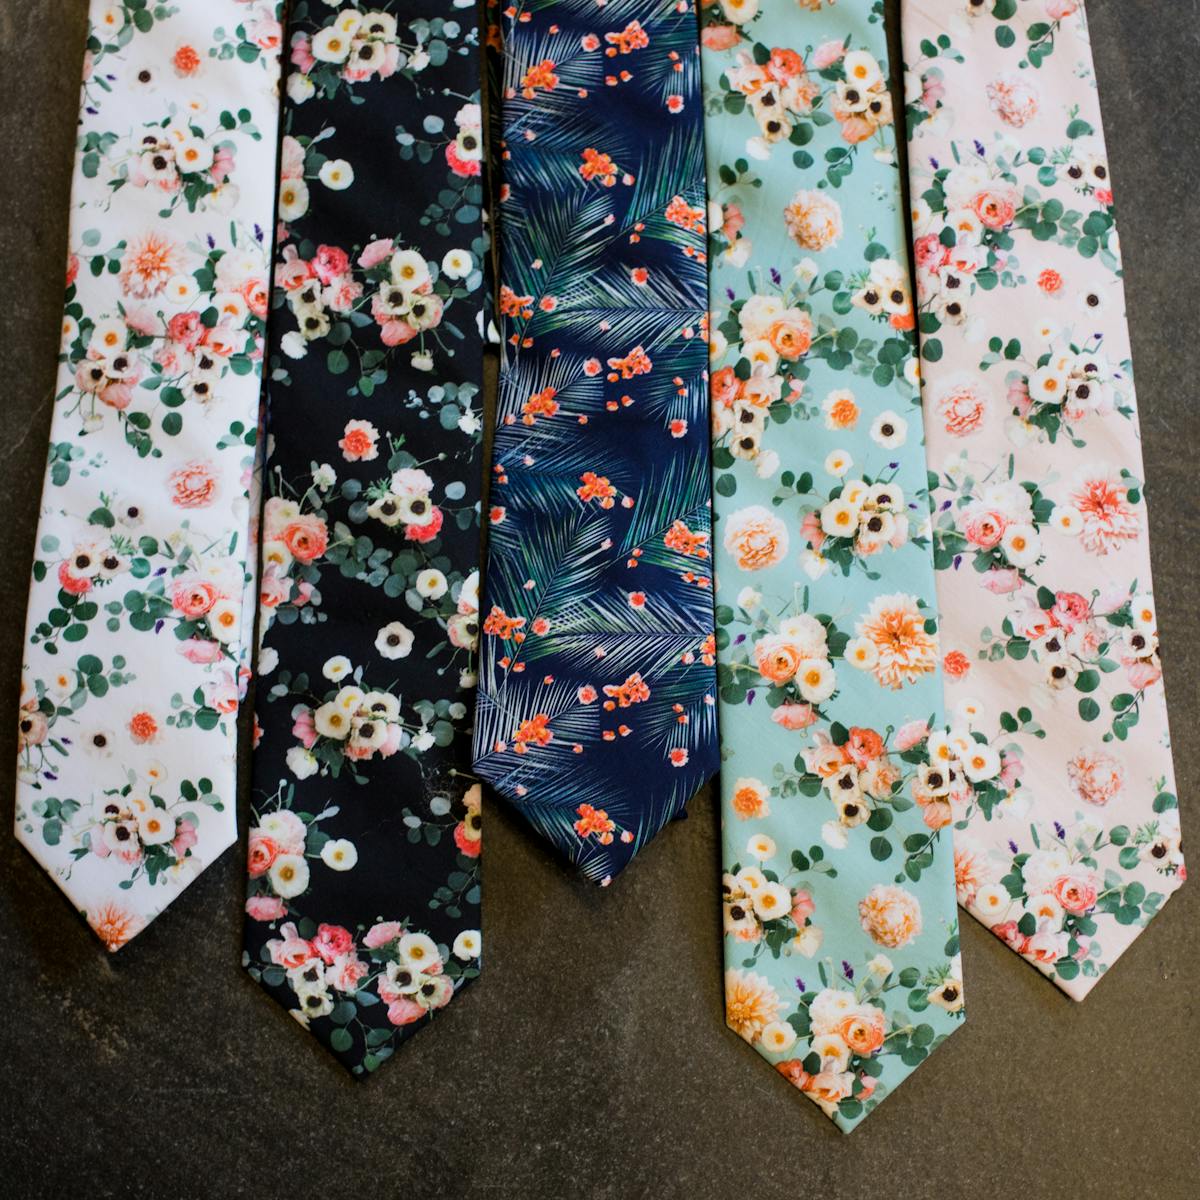 Patterned tie with wedding suit